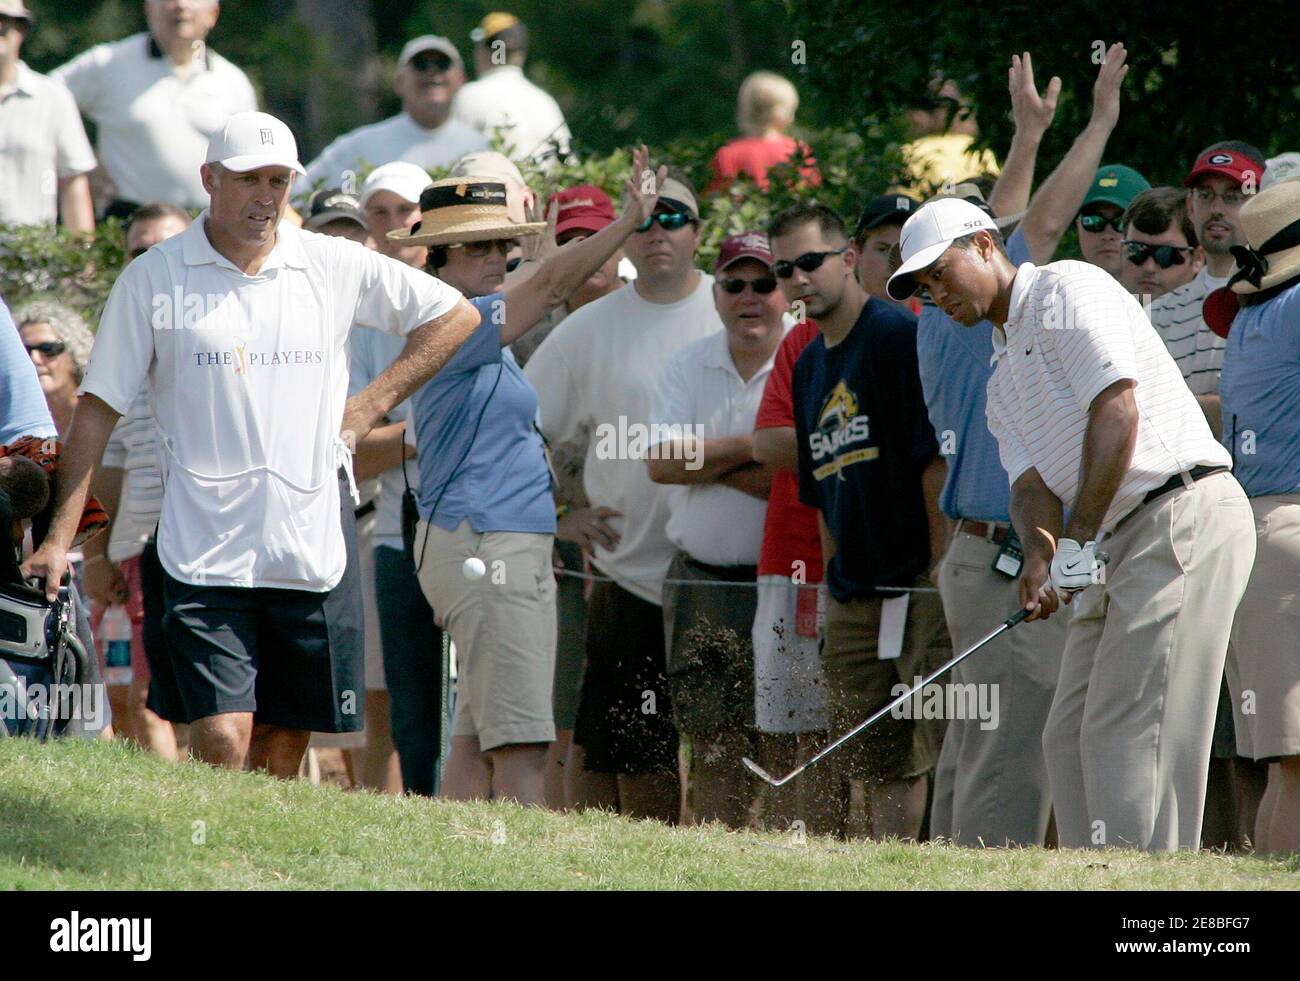 Tiger Woods chips onto the eighth green during the third round of play at The Players Championship golf tournament in Ponte Vedra Beach, Florida May 12, 2007. REUTERS/Rick Fowler (UNITED STATES) Stock Photo